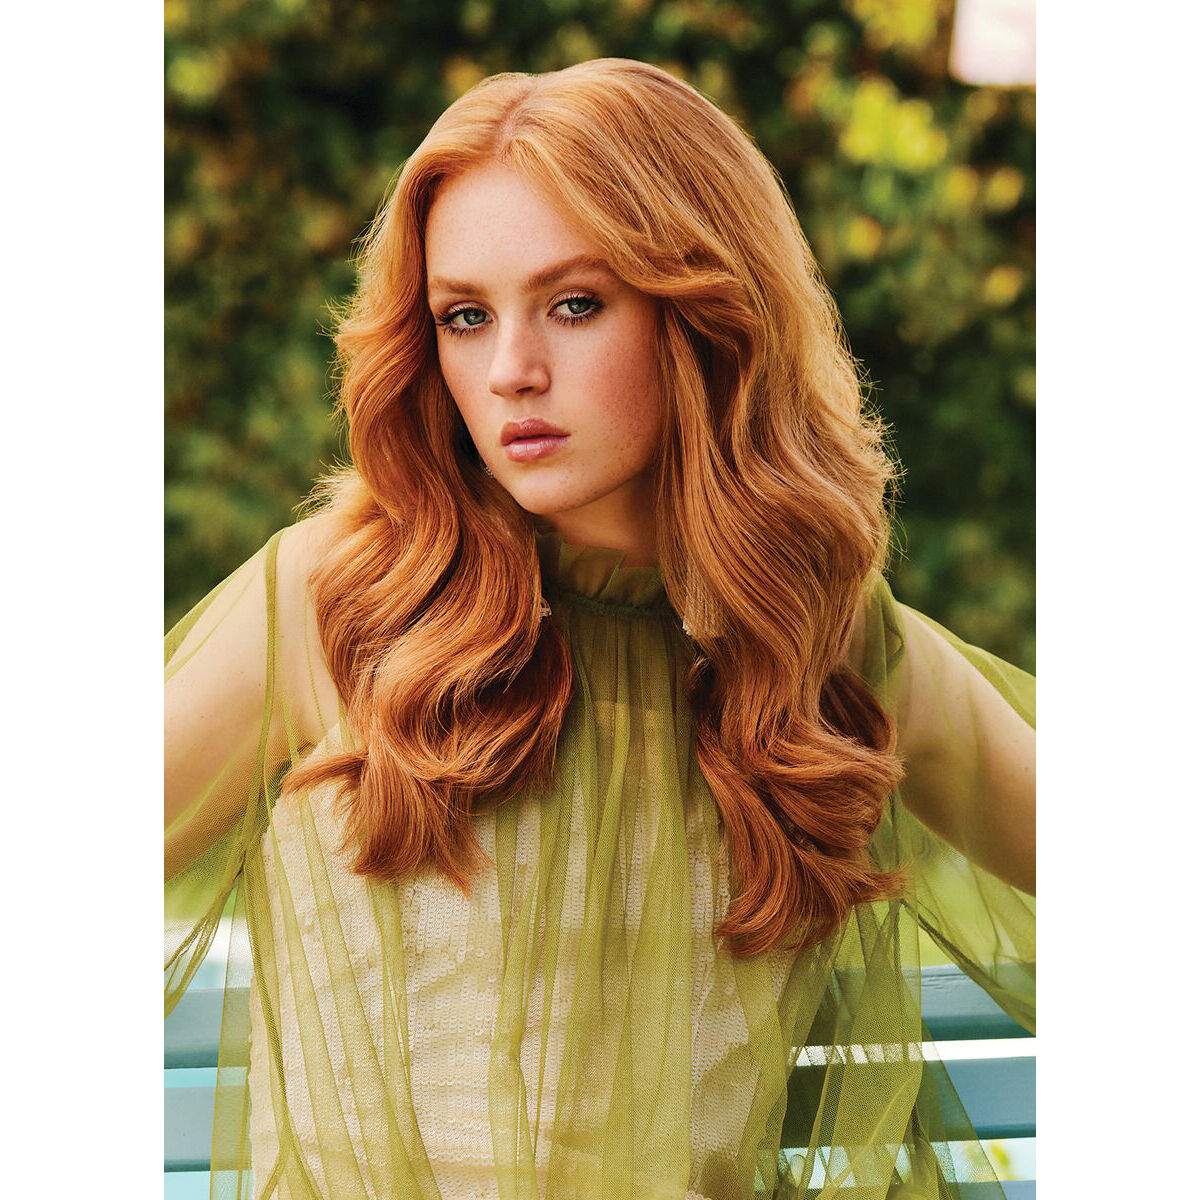 Red-haired woman with soft, flowing curls draped over a sheer lime green top, showcasing a simple yet elegant hairdo.